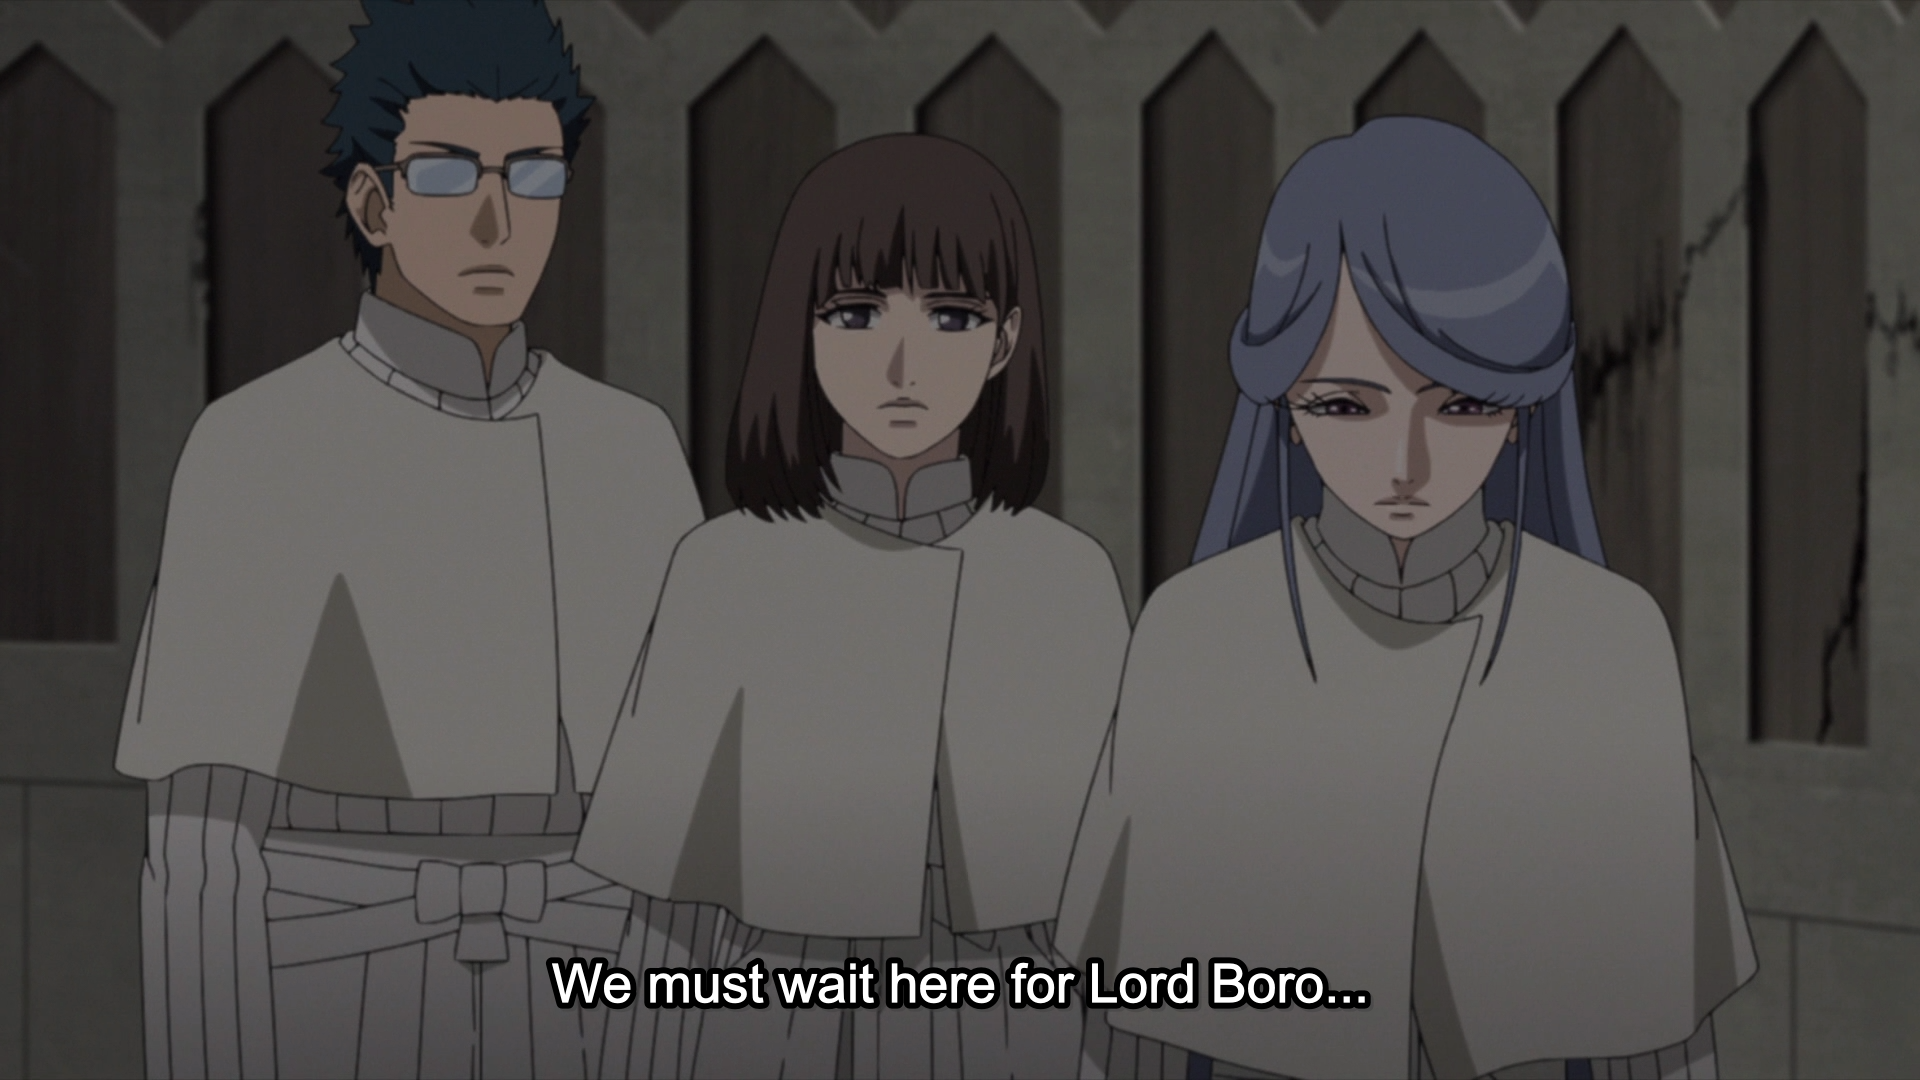 Boro's followers wait for him in Boruto episode 210. Image subtitle reads 
"We must wait here for Lord Boro"